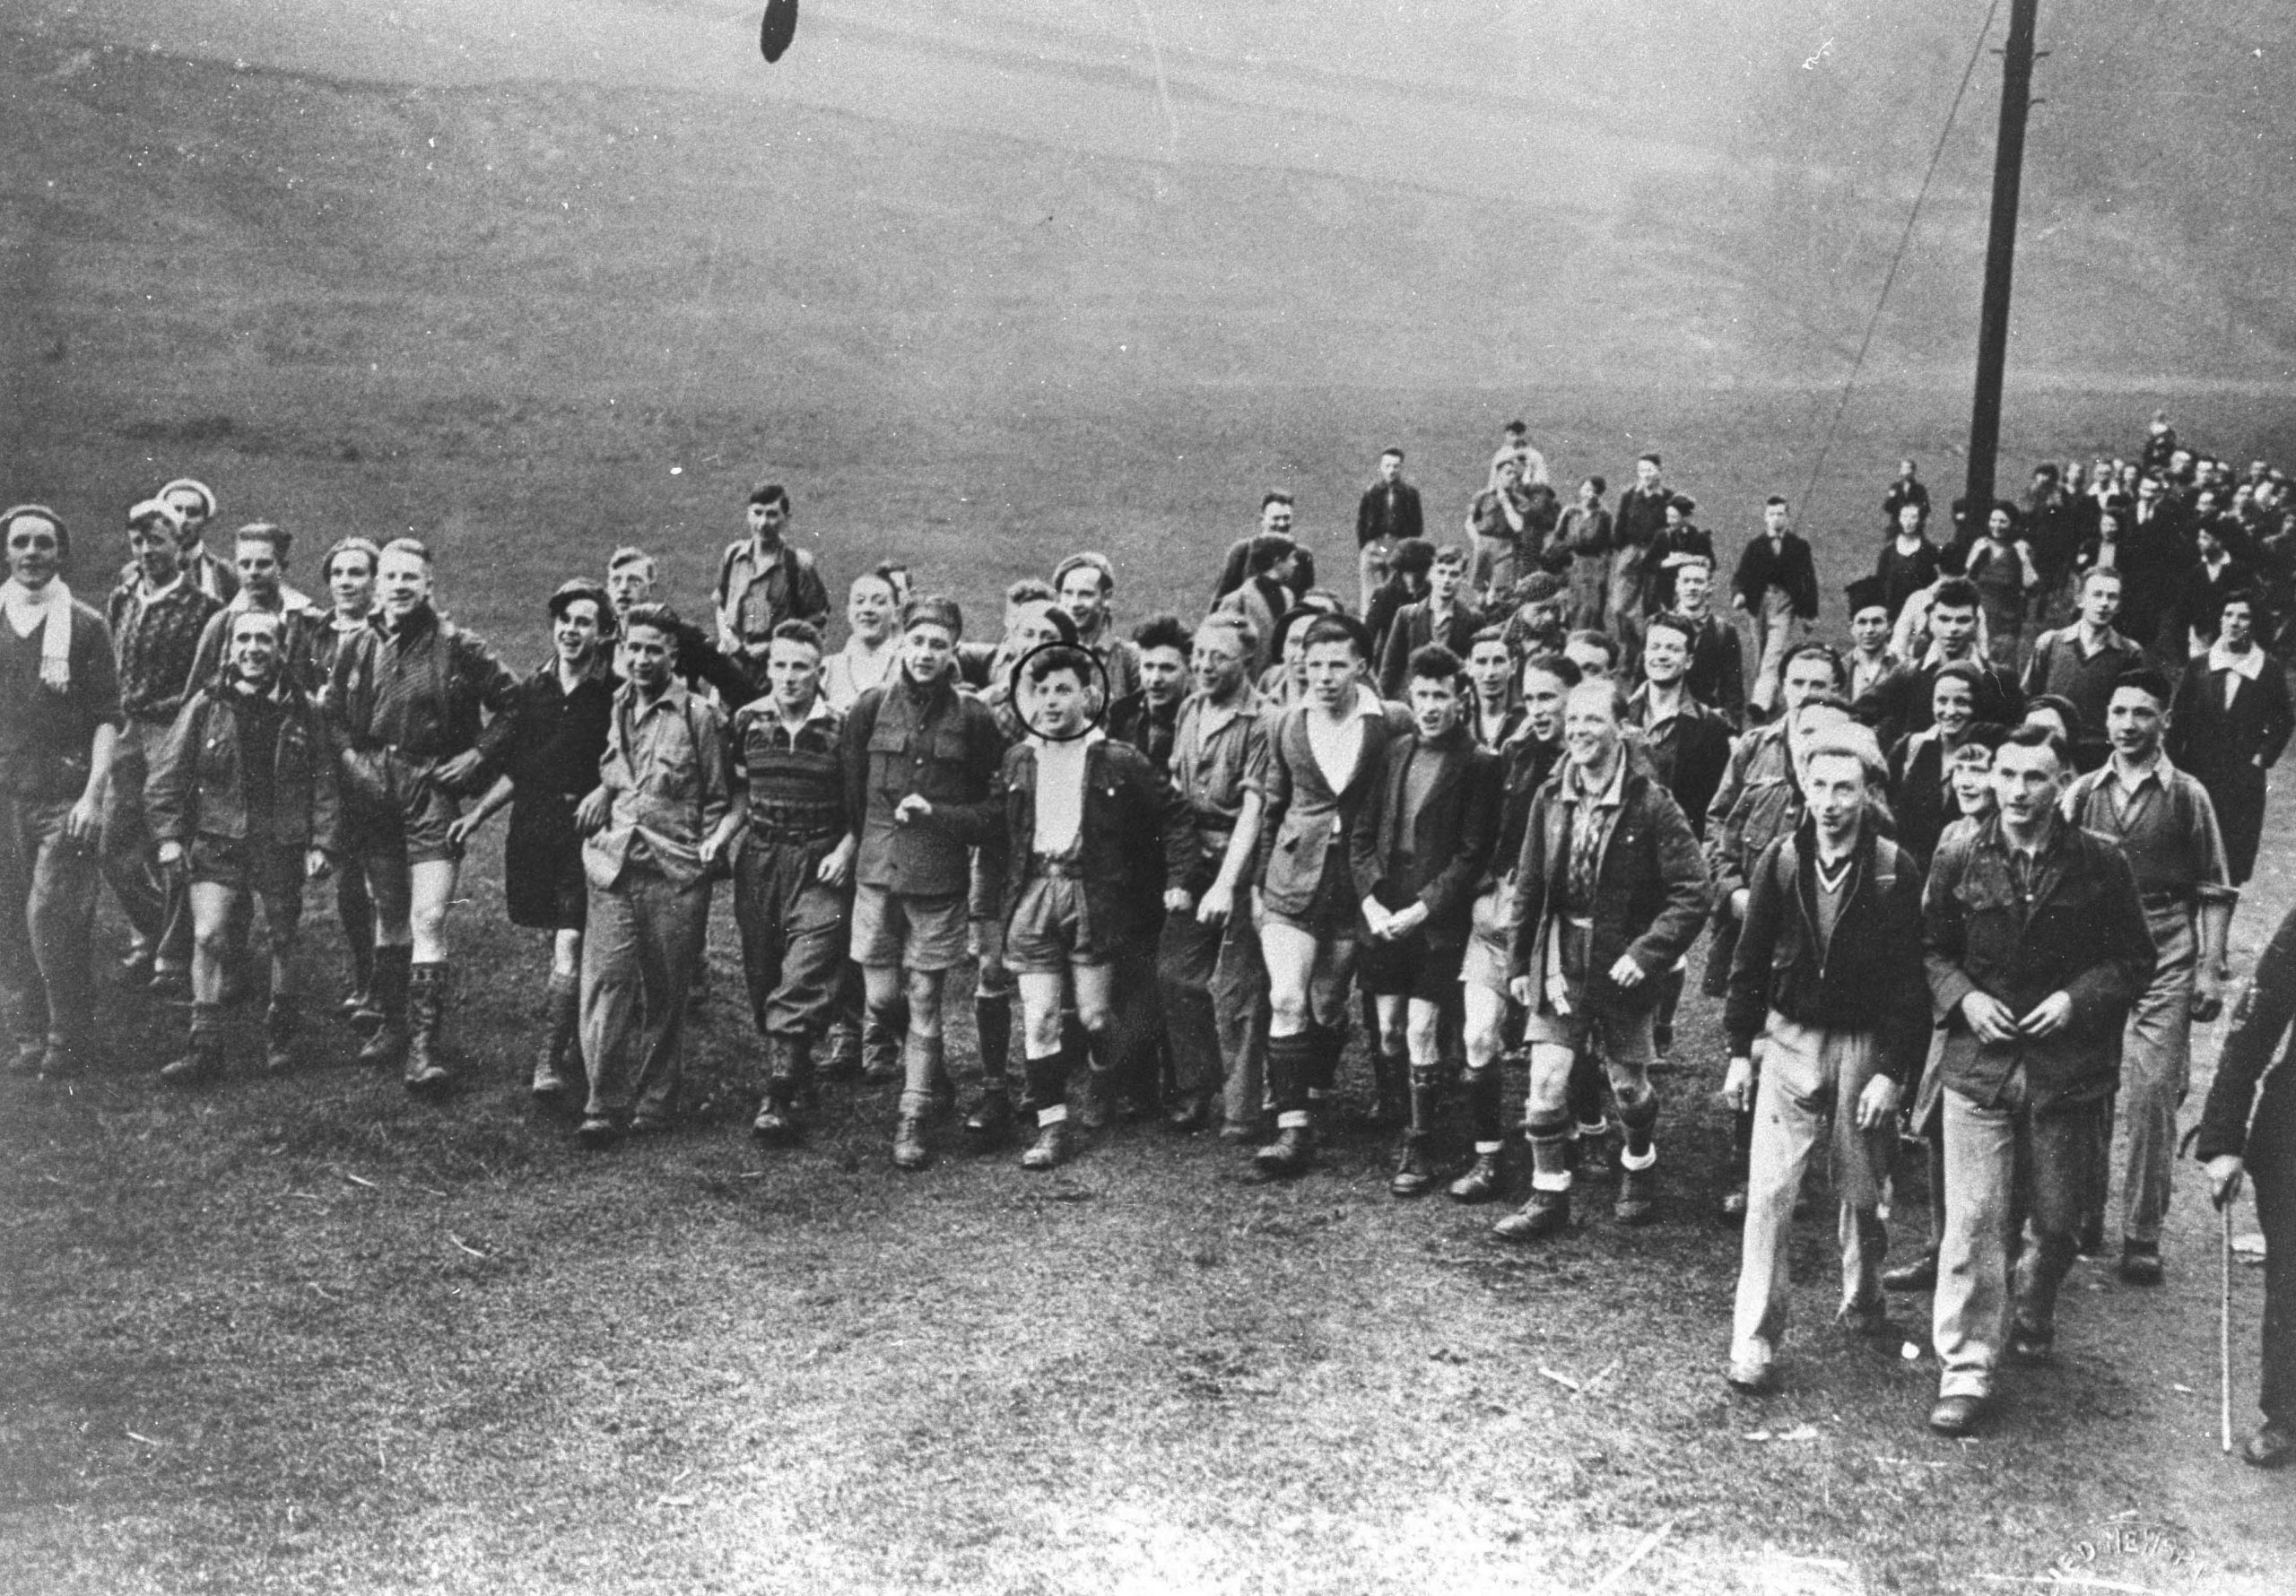 Benny Leading The Mass Trespass On Kinder Scout, 1932.